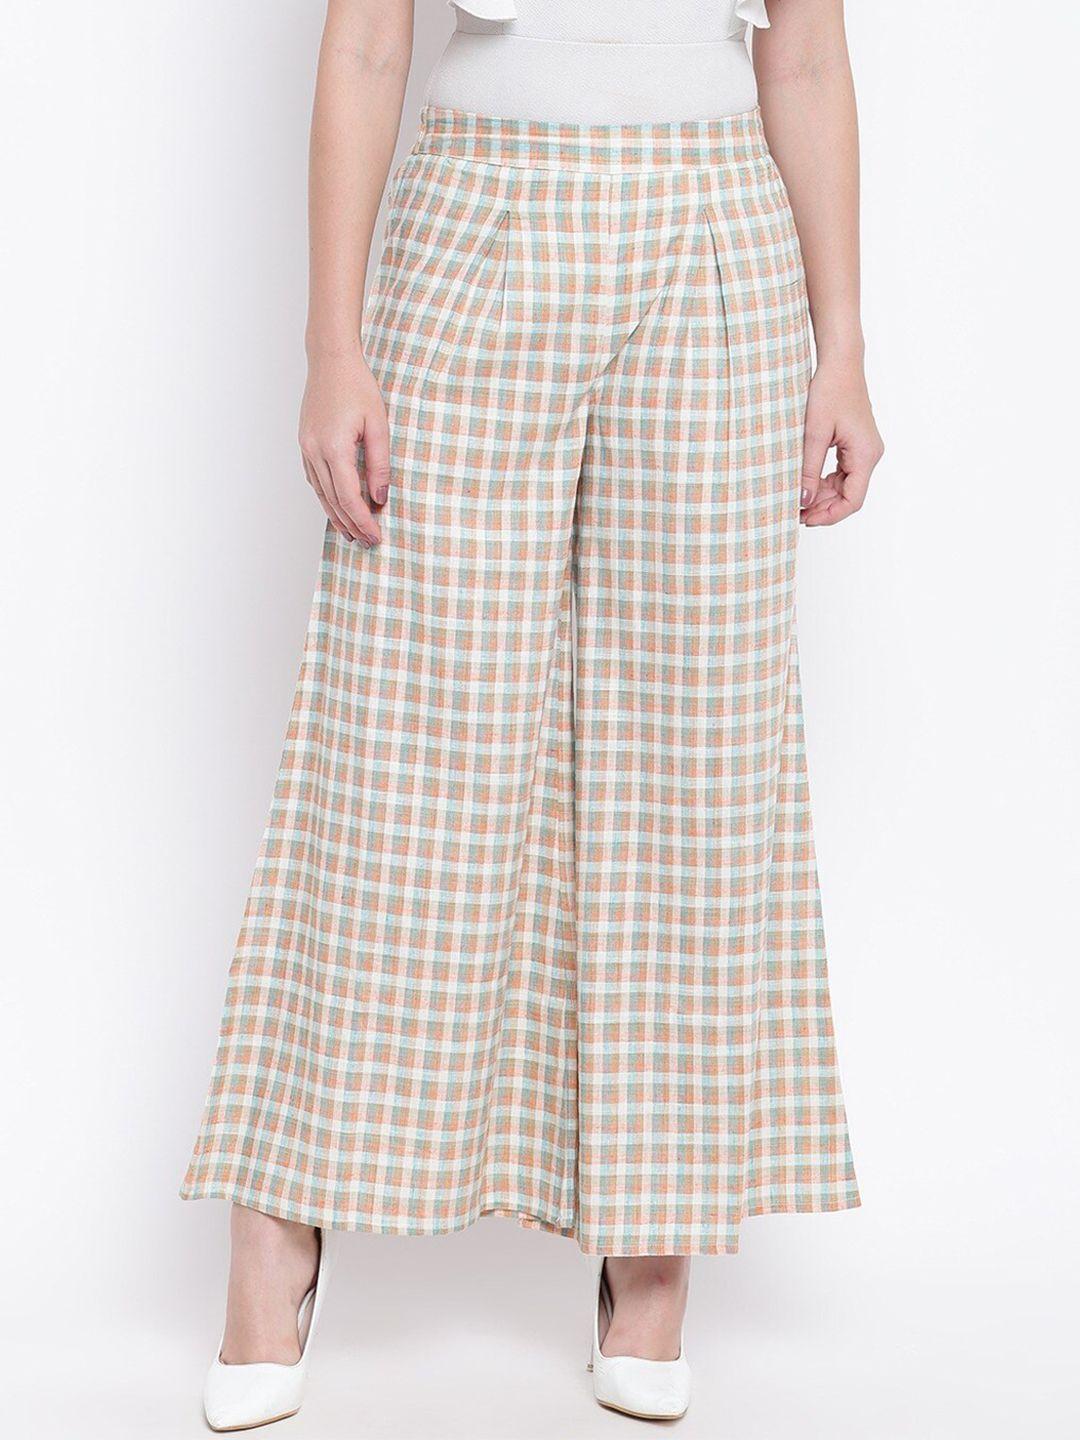 be indi women peach-coloured & off white checked palazzos